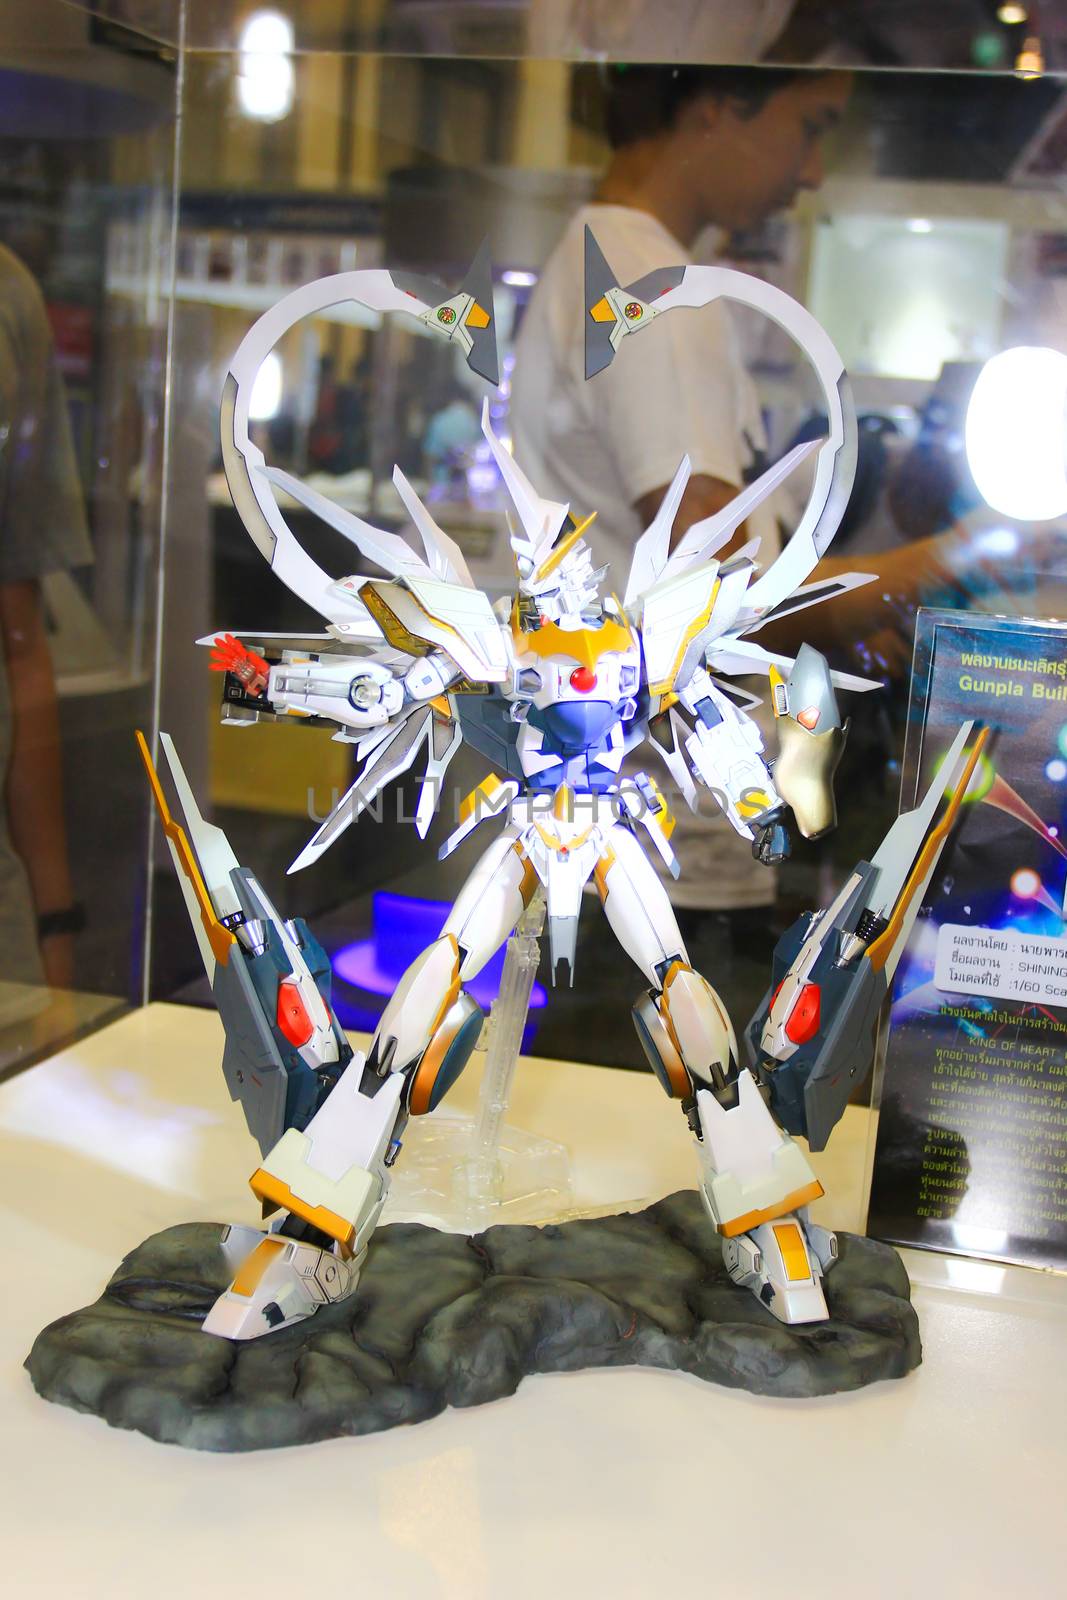 A model of the character Gundam from the movies and comics 10 by redthirteen